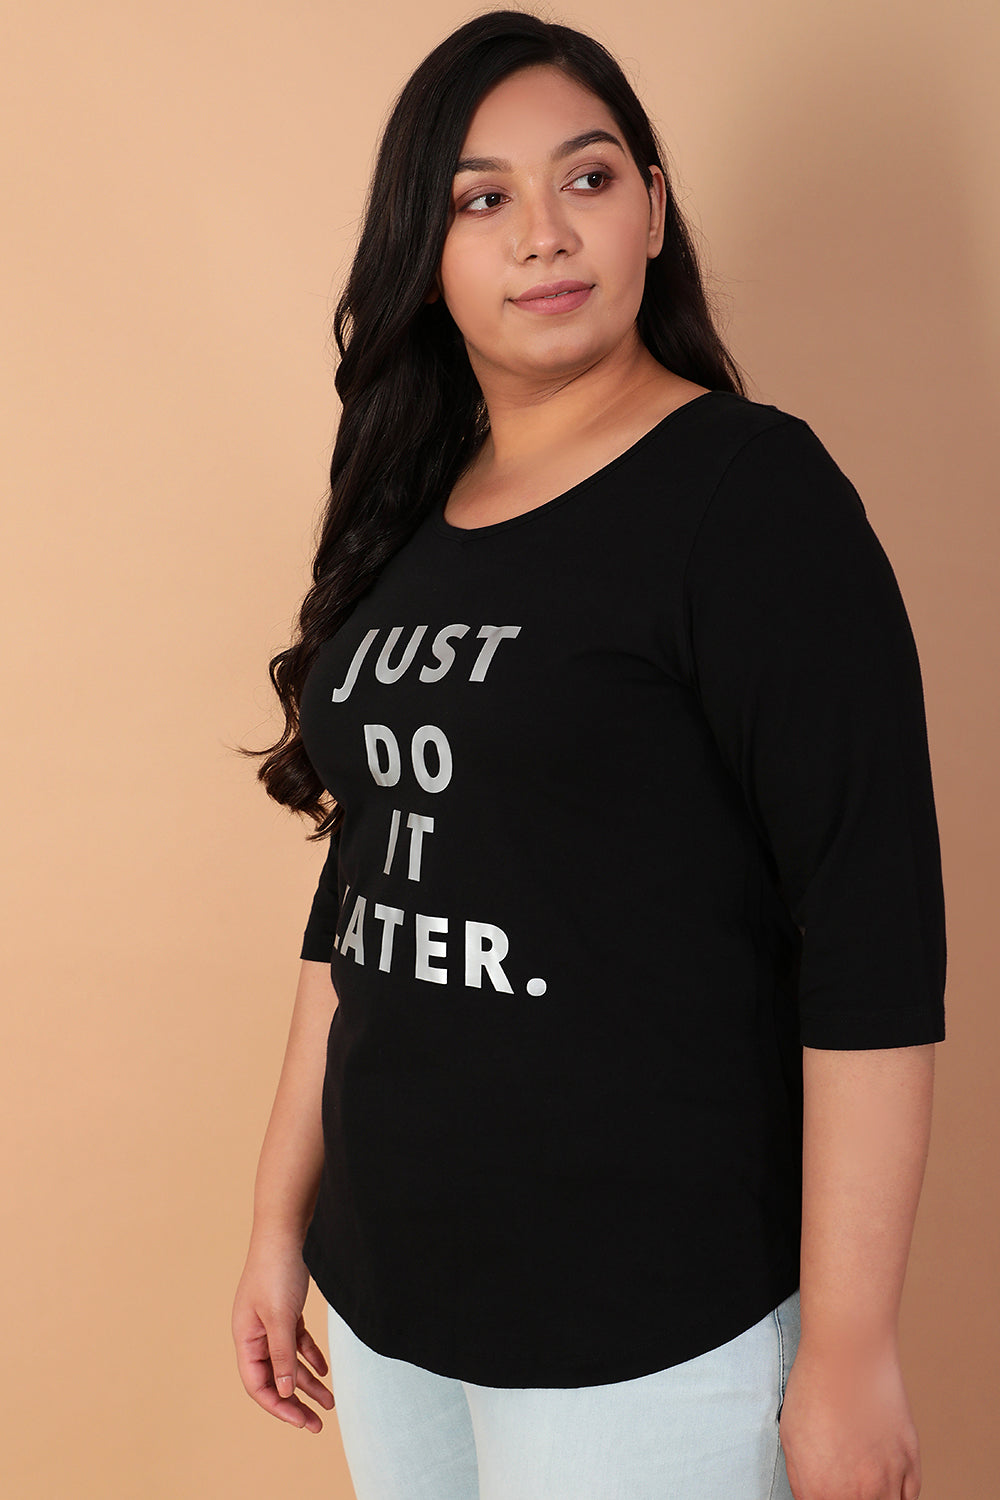 Just Do It Later Black Tshirt for Women